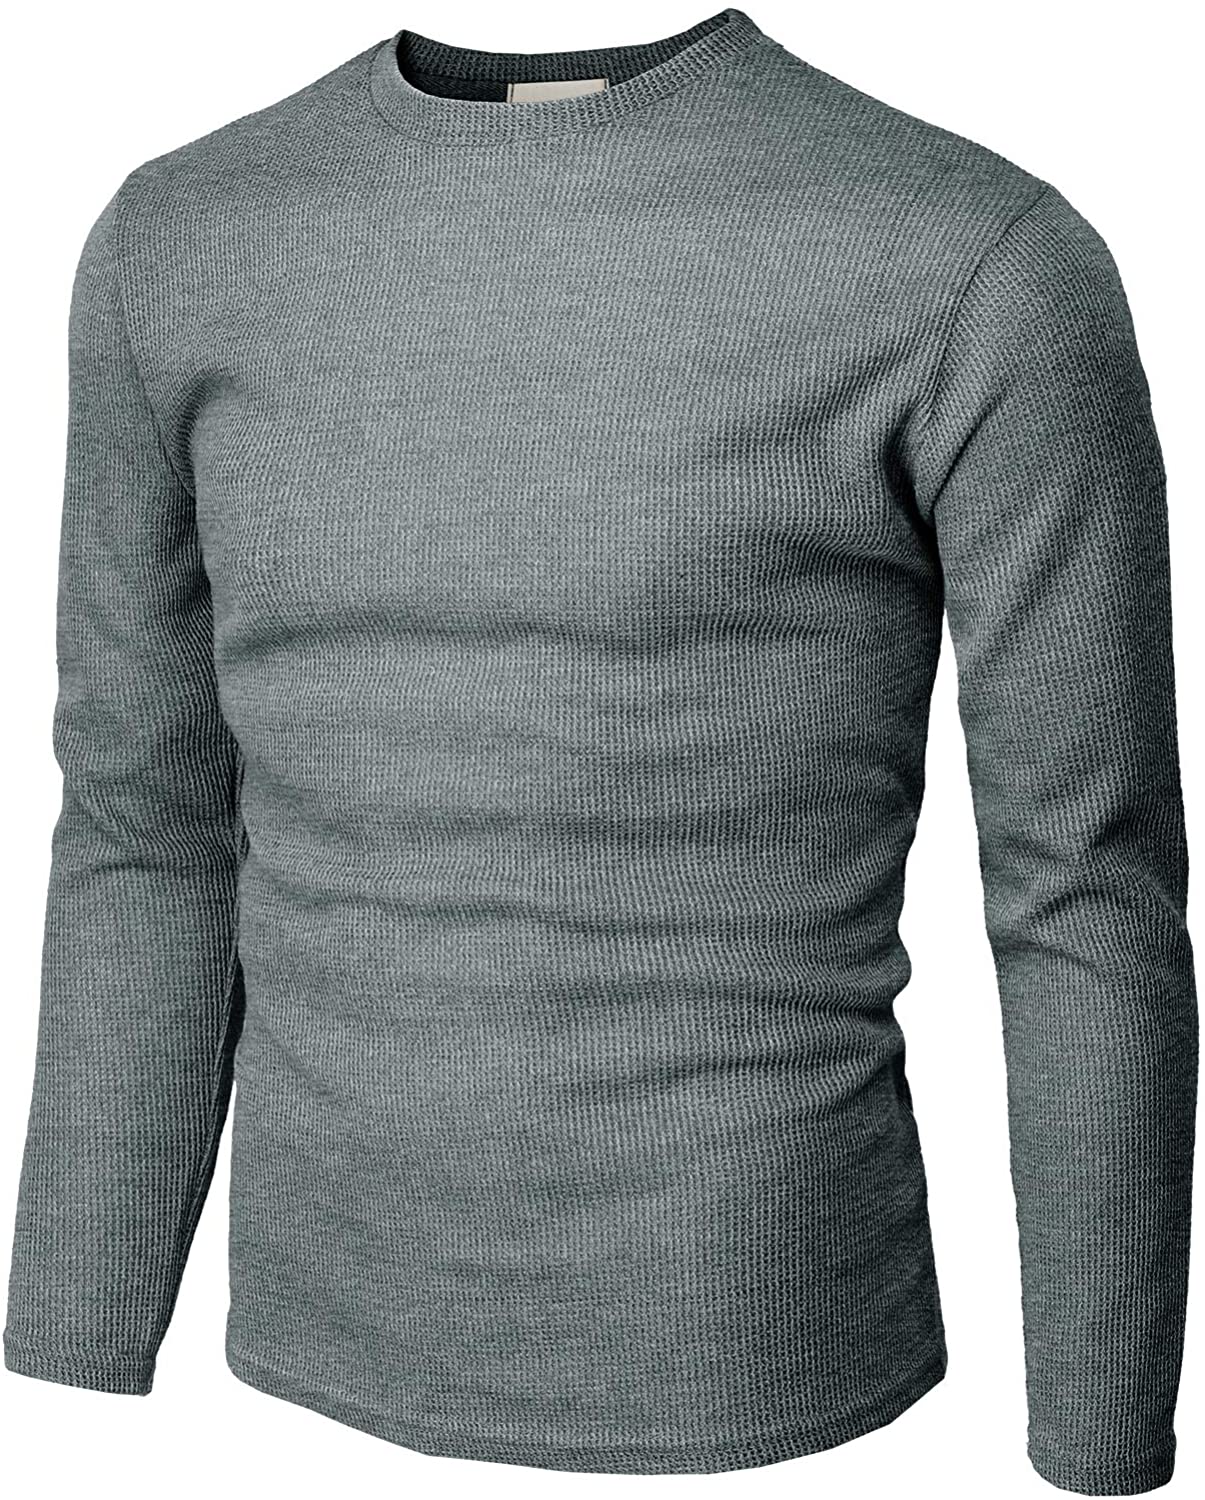 H2H Mens Casual Fit Pullover Sweaters Knitted Tops Longsleeve B | eBay